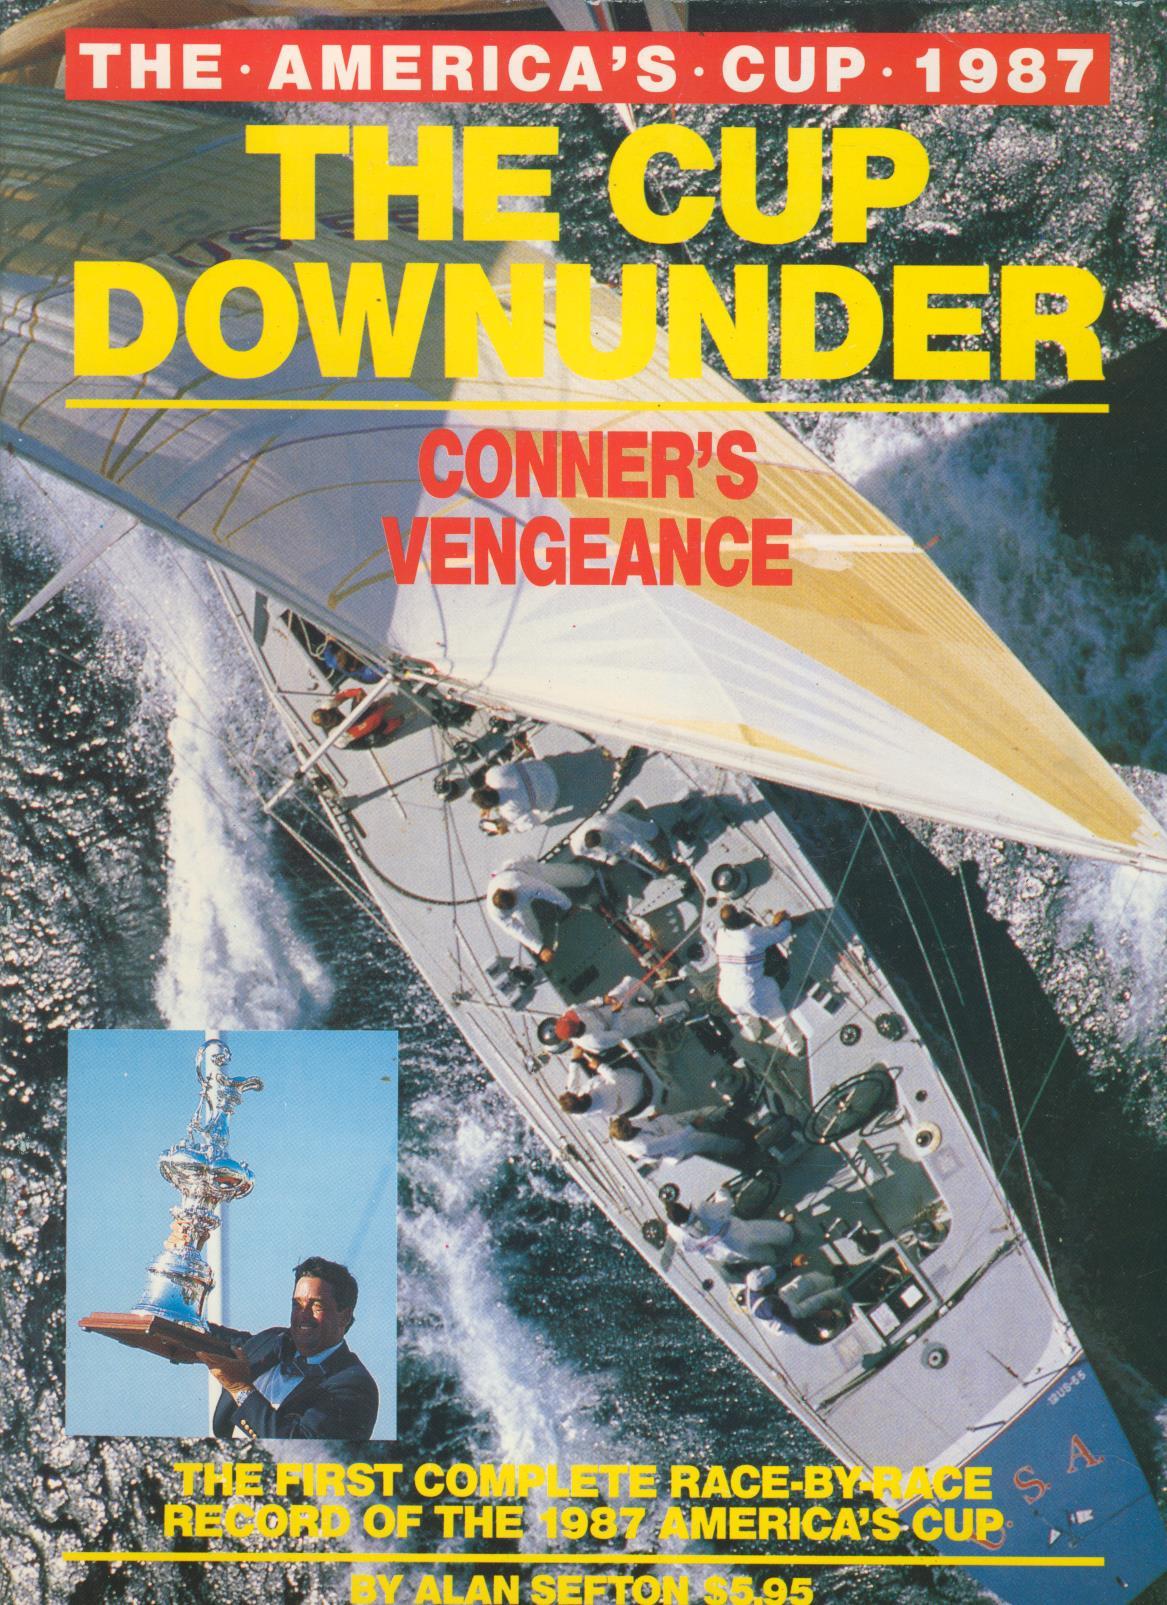 America's Cup '87 Don't Jibe Sports Advertising Poster